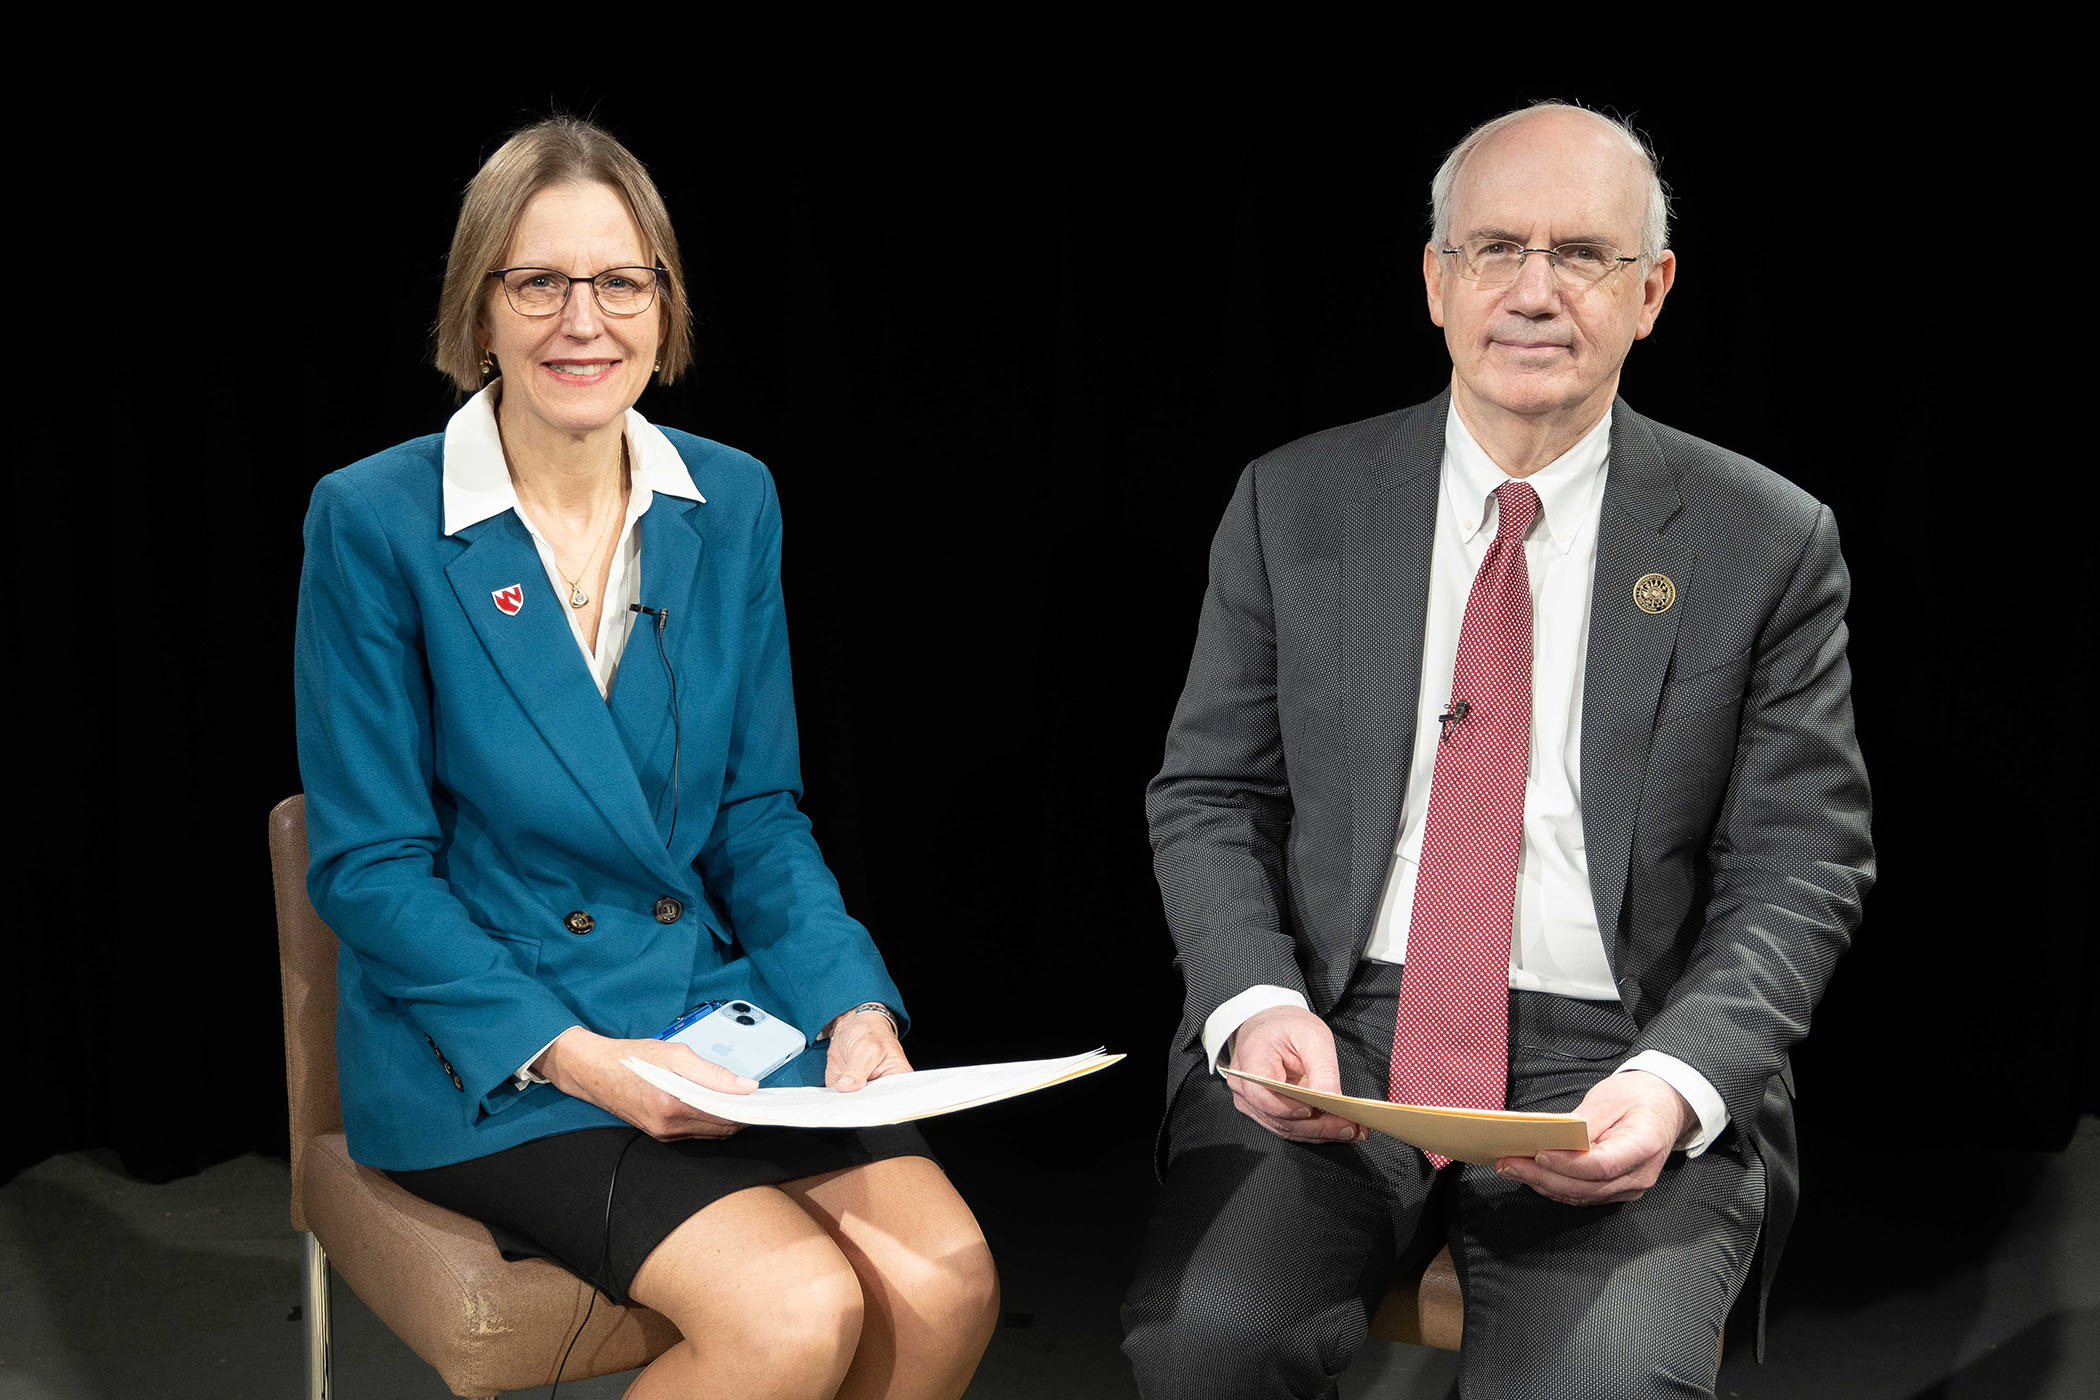 Joann Sweasy&comma; PhD&comma; director of the Fred & Pamela Buffett Cancer Center and Eppley Institute for Research in Cancer and Allied Diseases&comma; joins UNMC Chancellor Jeffrey P&period; Gold&comma; MD&comma; in his latest &OpenCurlyDoubleQuote;Health Care Heart to Heart” podcast episode&period;